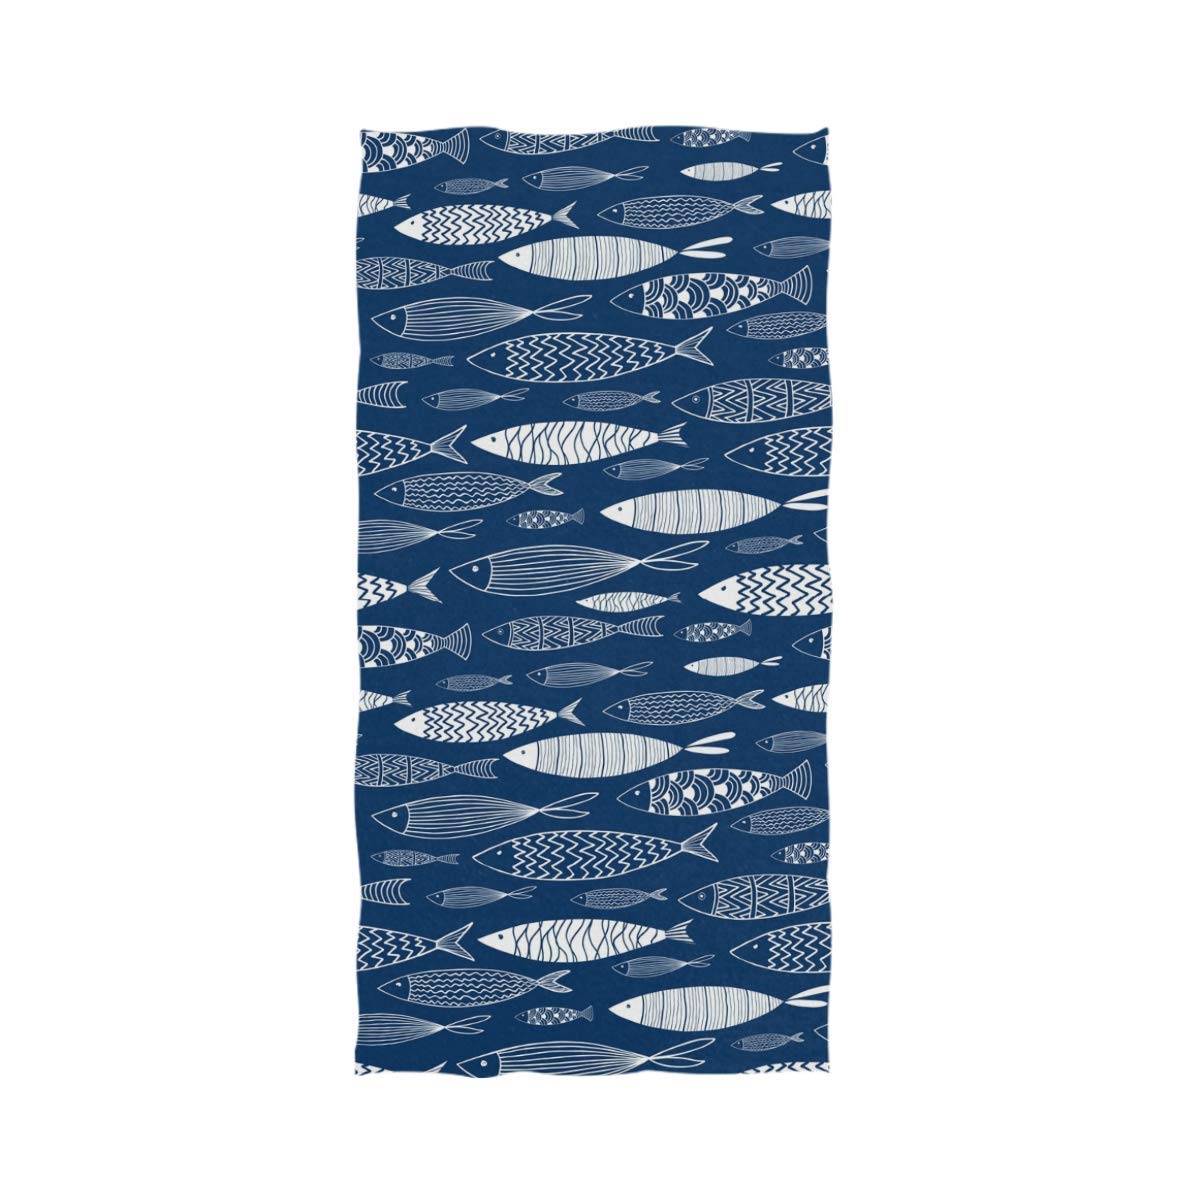 Naanle Stylish Realistic Underwater Shoal of Fish Soft Highly